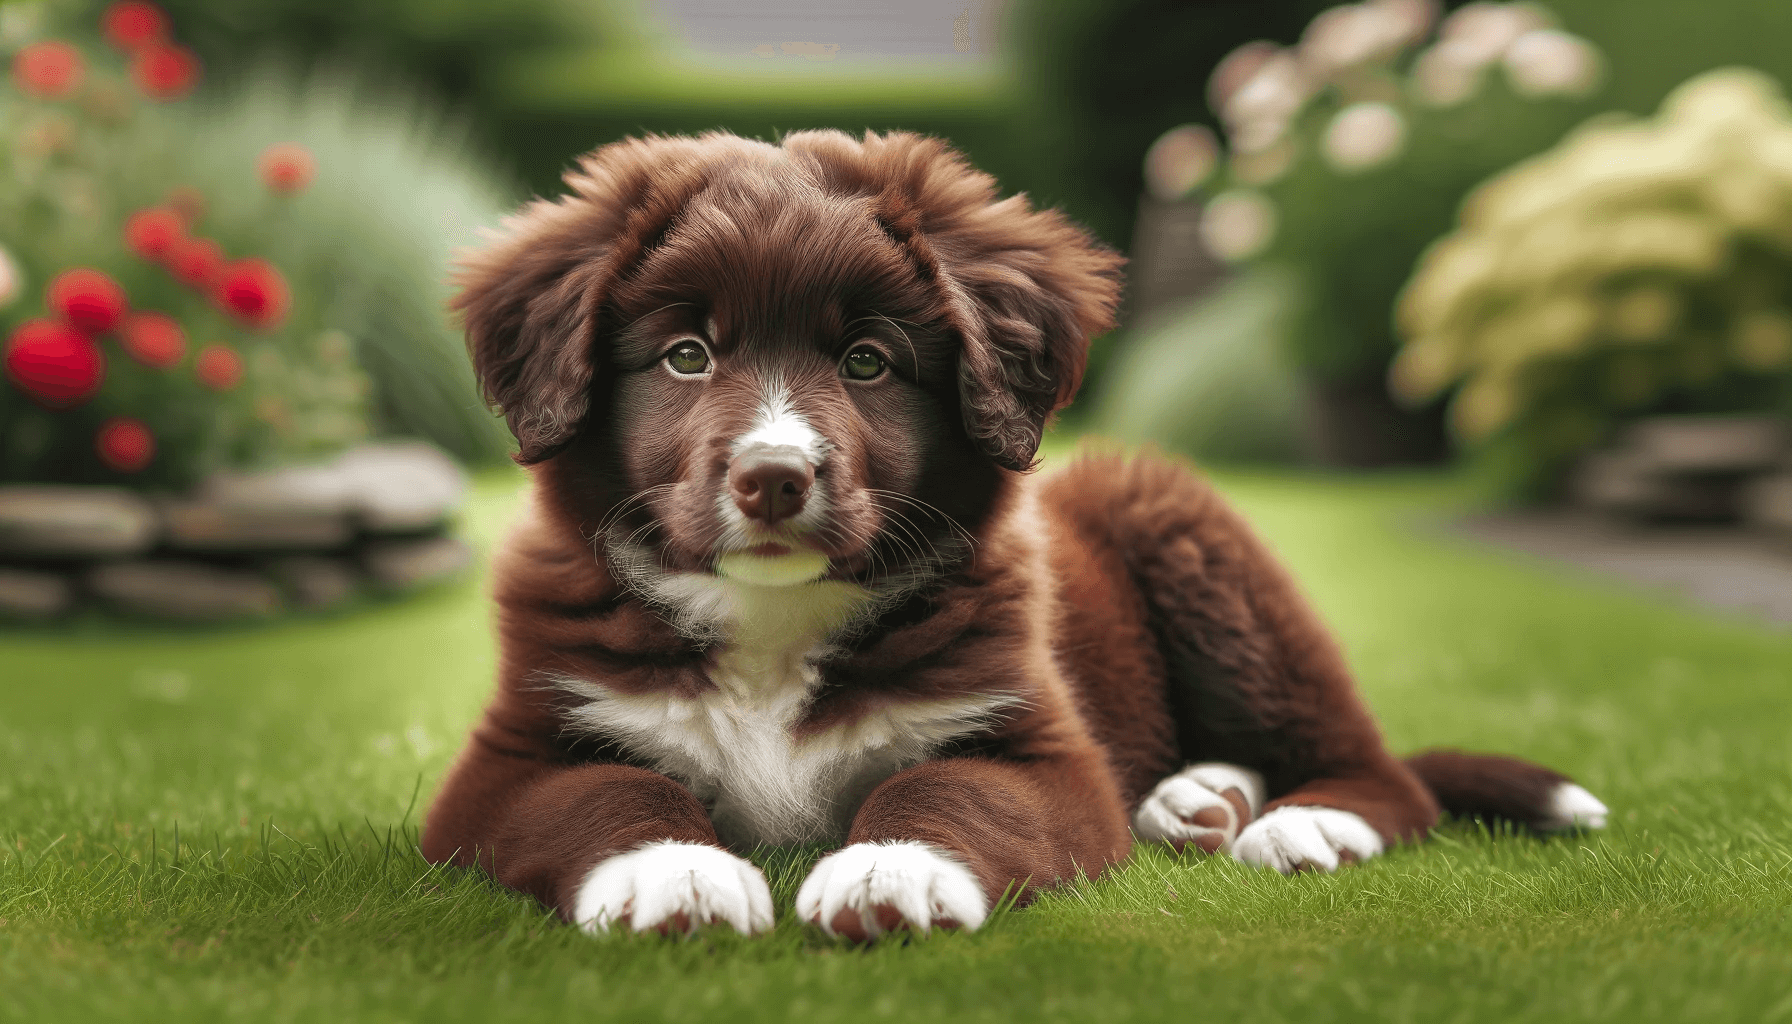 Borador Border Collie Lab Mix puppy lying contently on lush green grass. The puppy should have a chocolate brown coat with softness of youth.